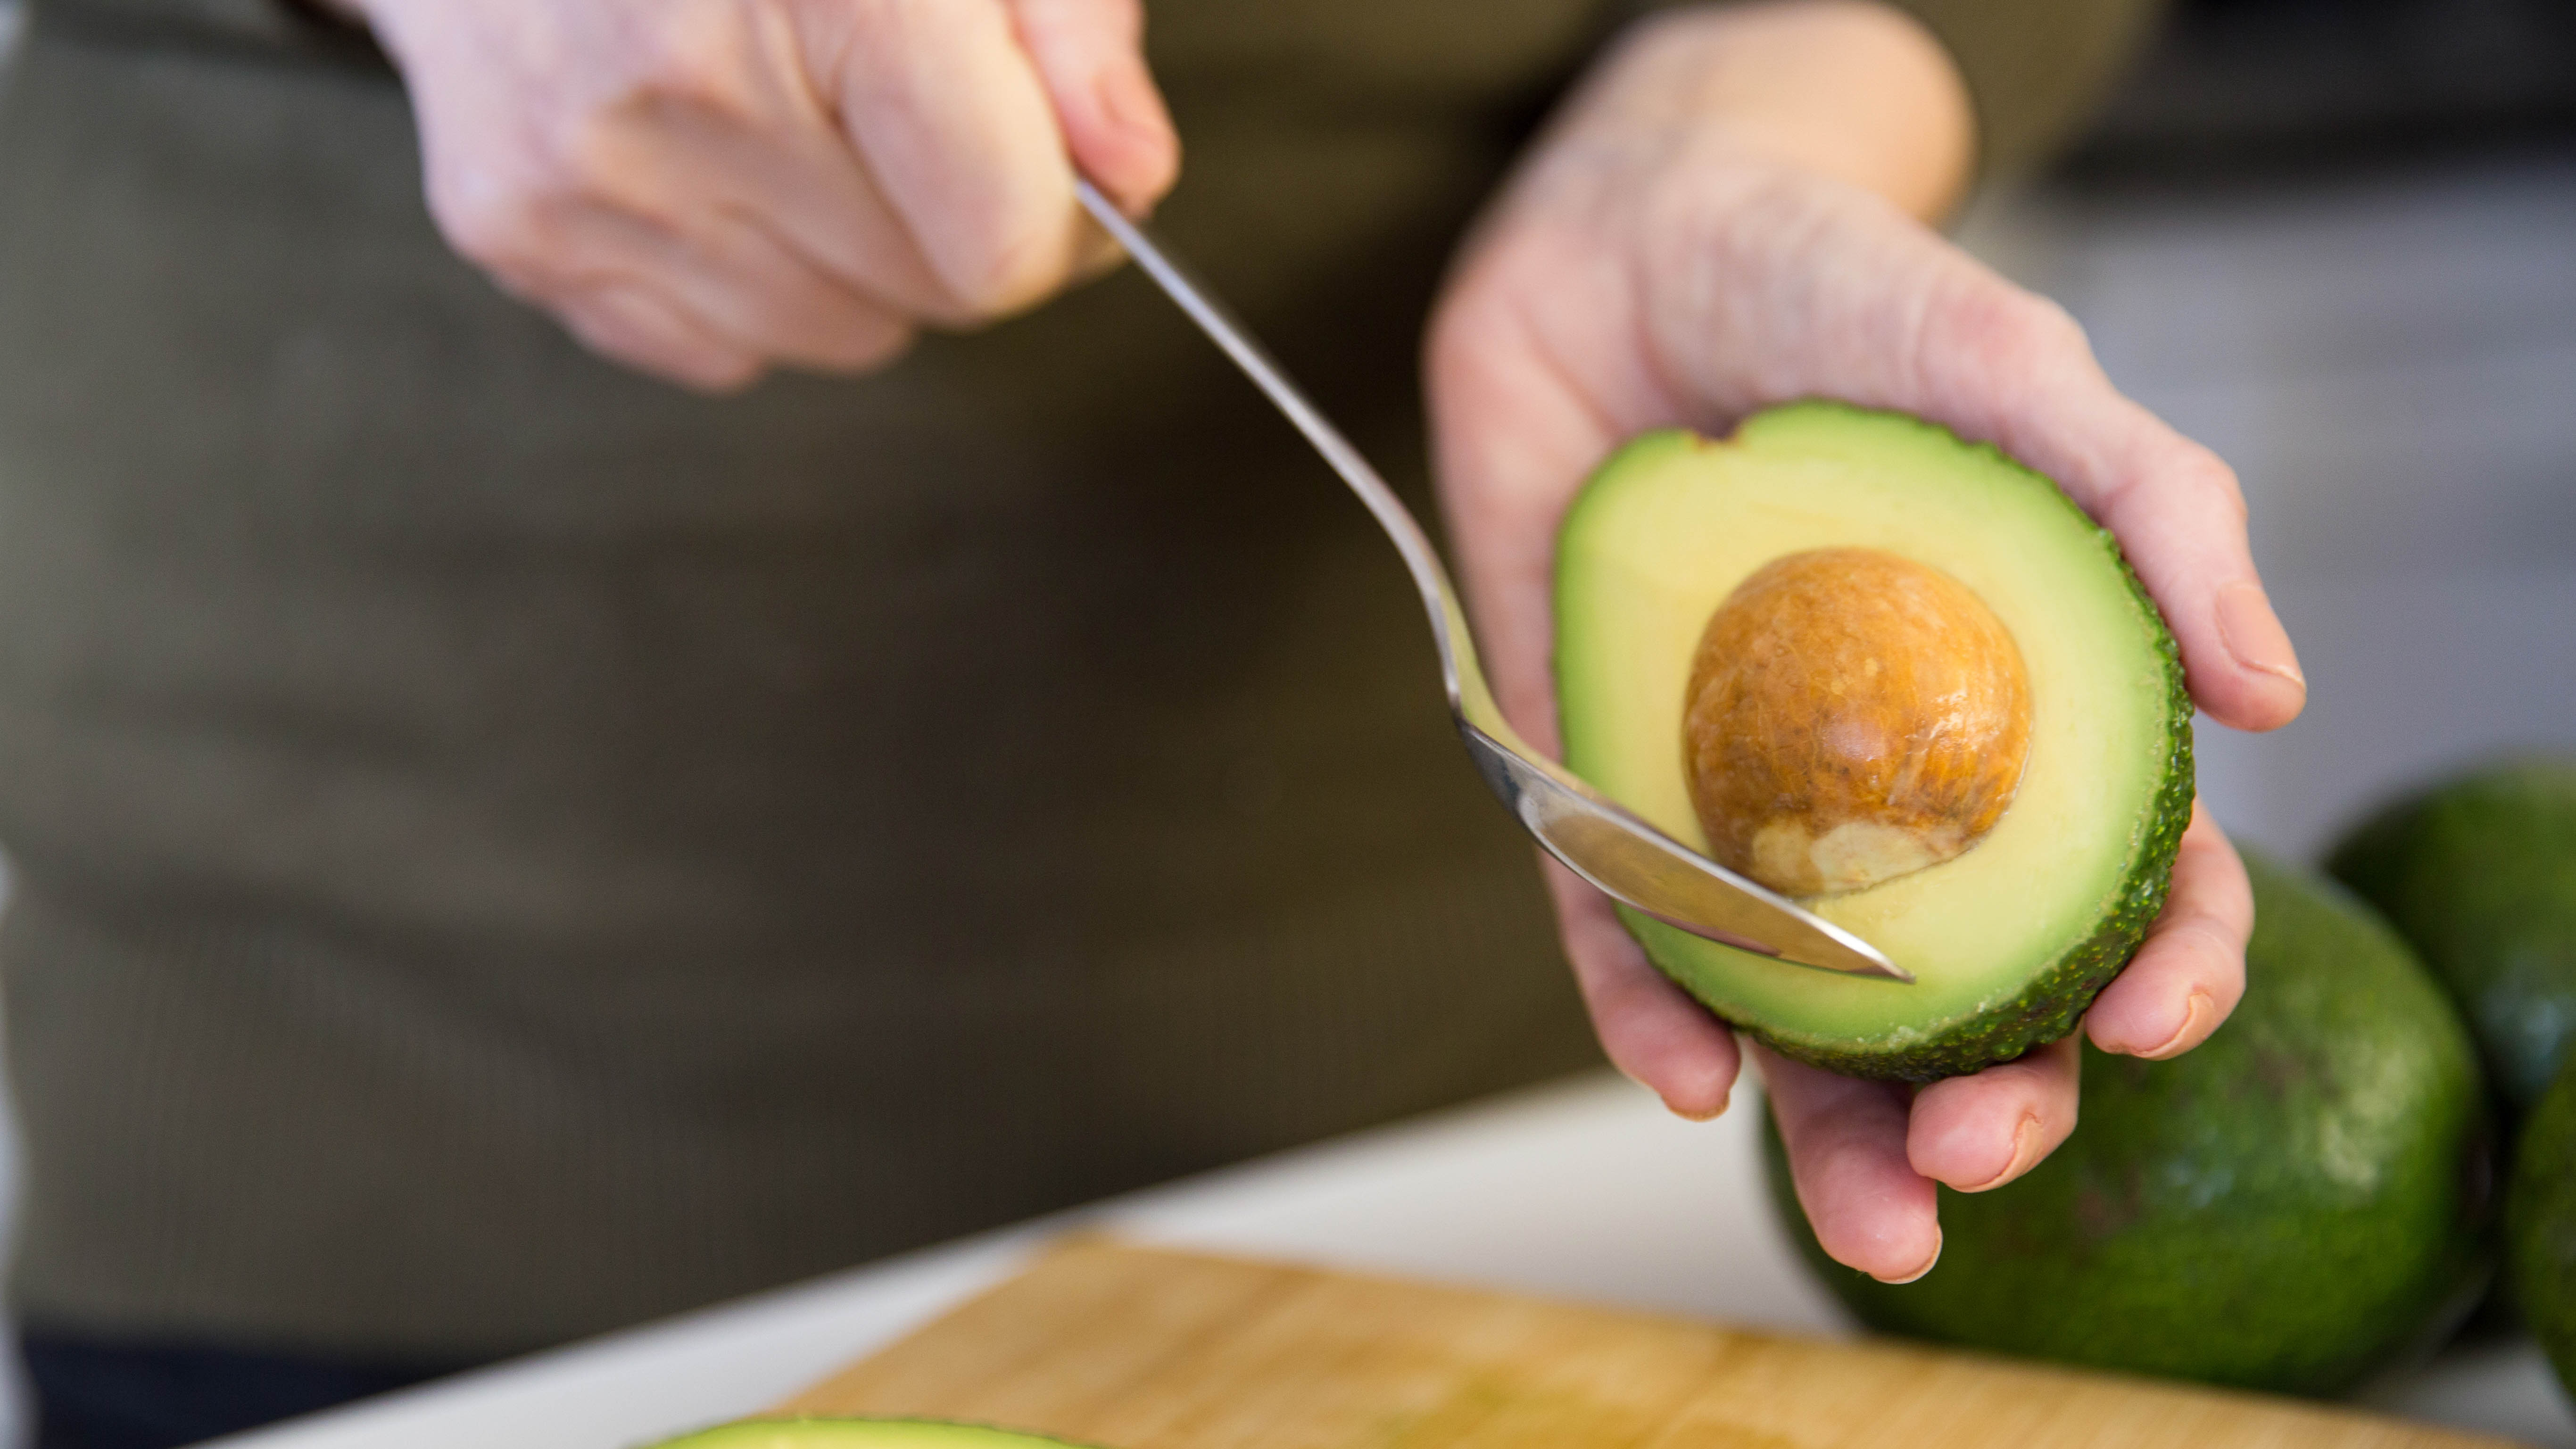 The seed being removed from an avocado with a spoon